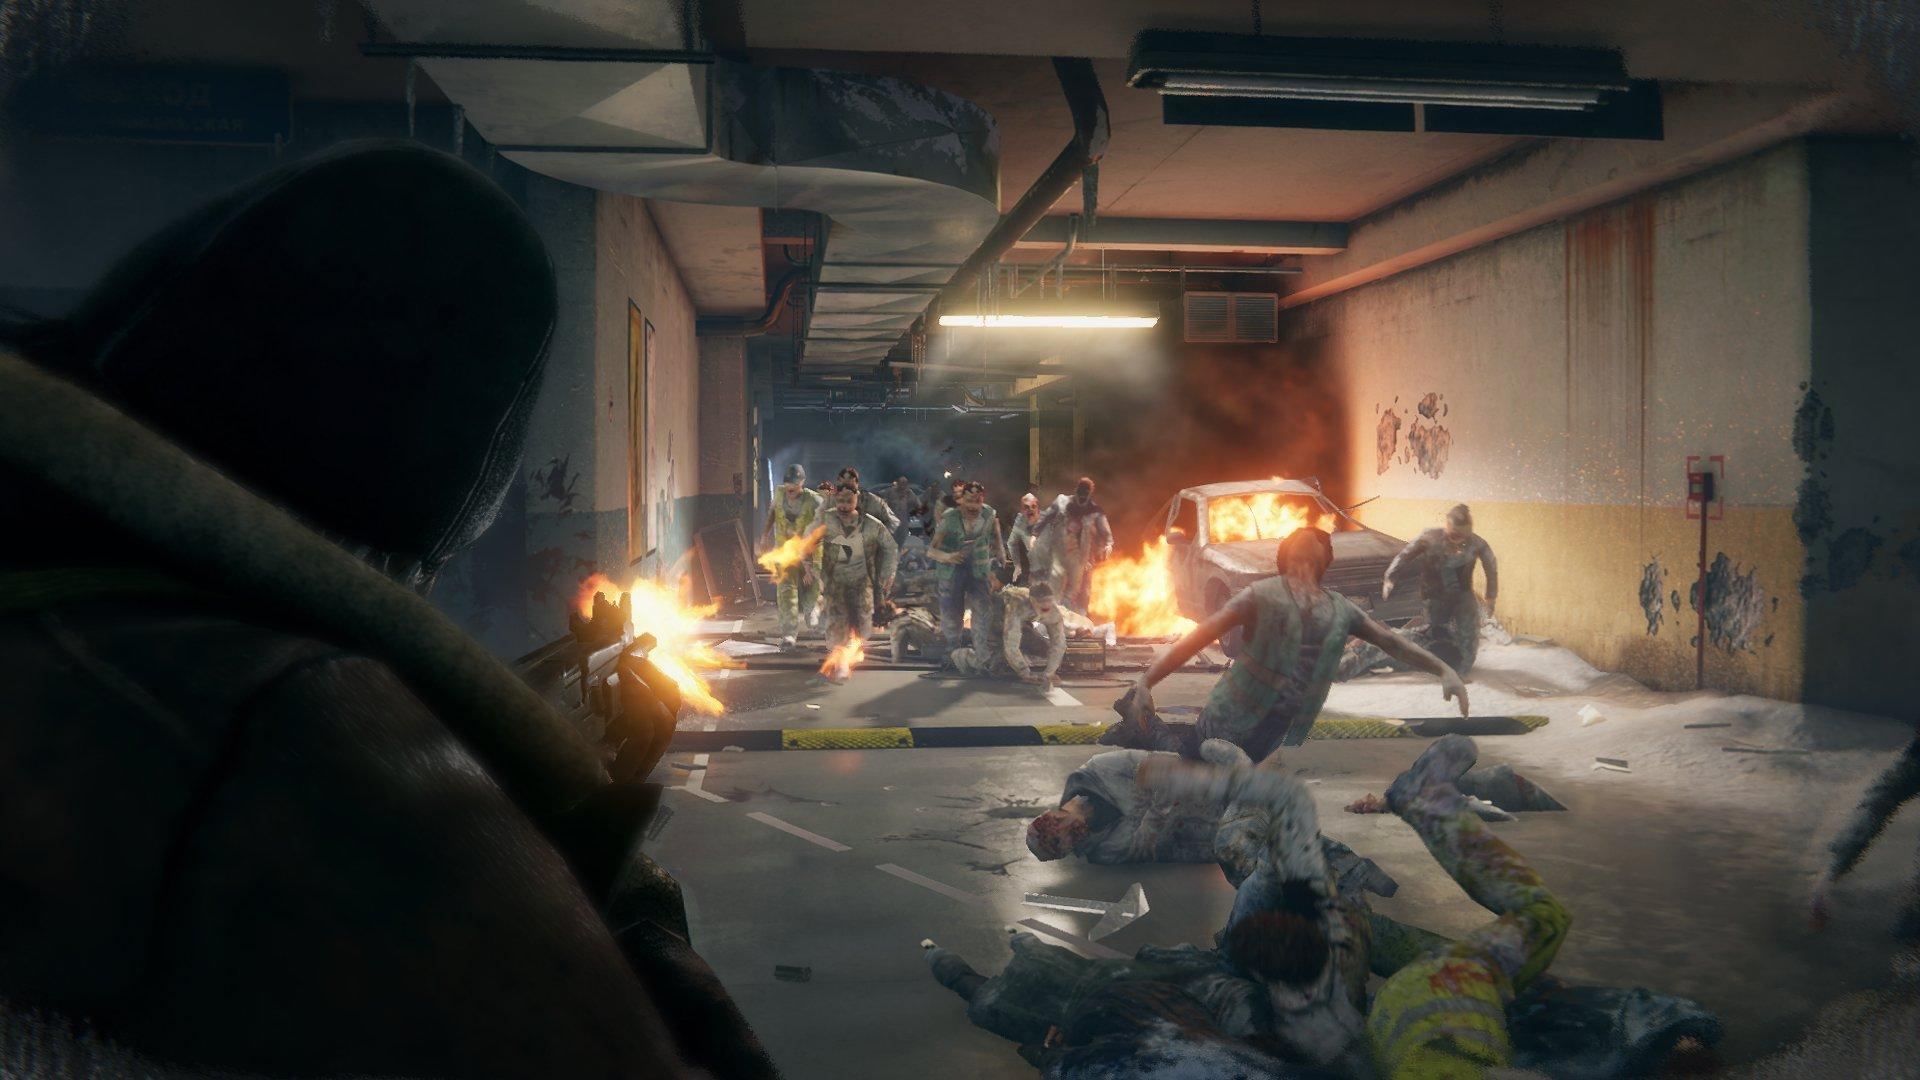 Buy World War Z PS4 Compare Prices